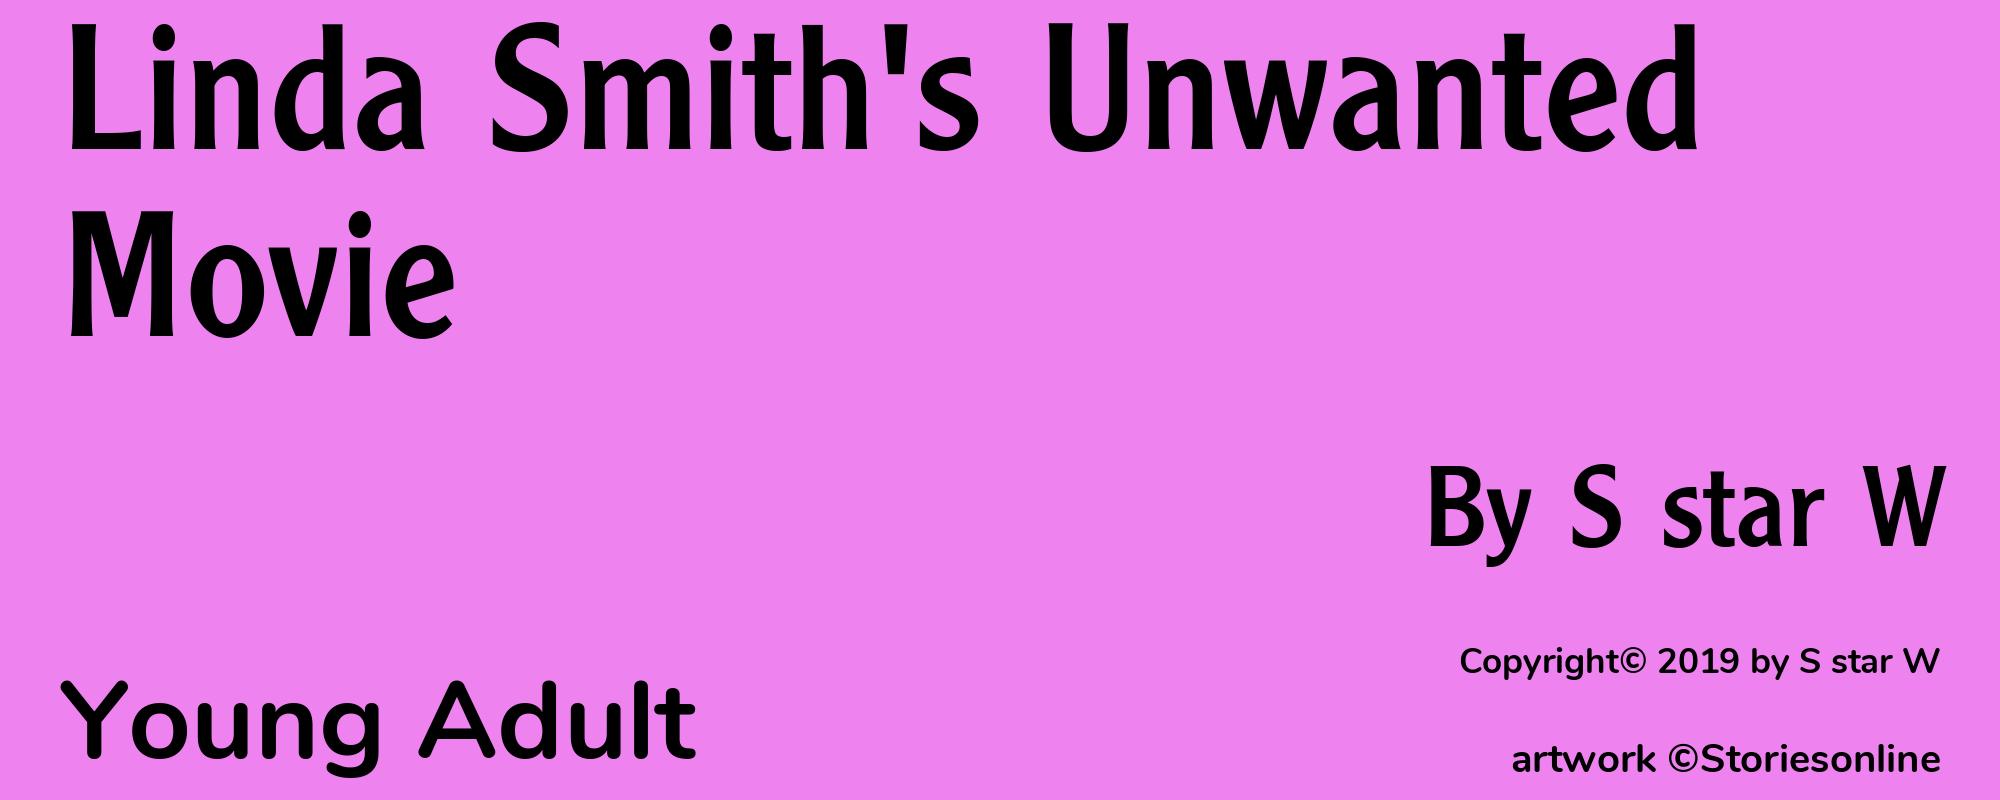 Linda Smith's Unwanted Movie - Cover